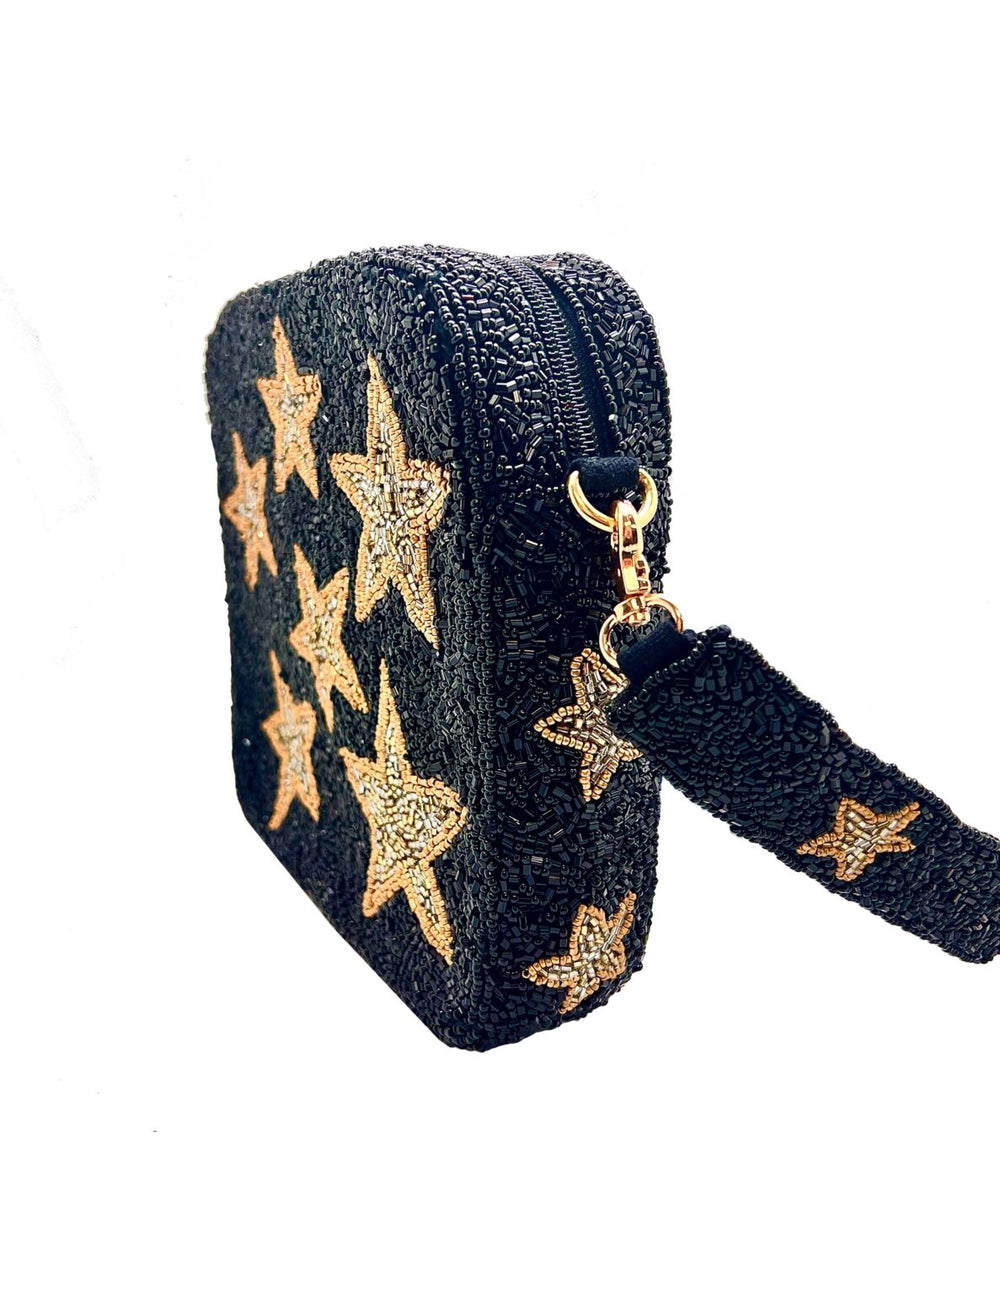 BLACK GOLD STAR BEADED BOX BAG - Kingfisher Road - Online Boutique